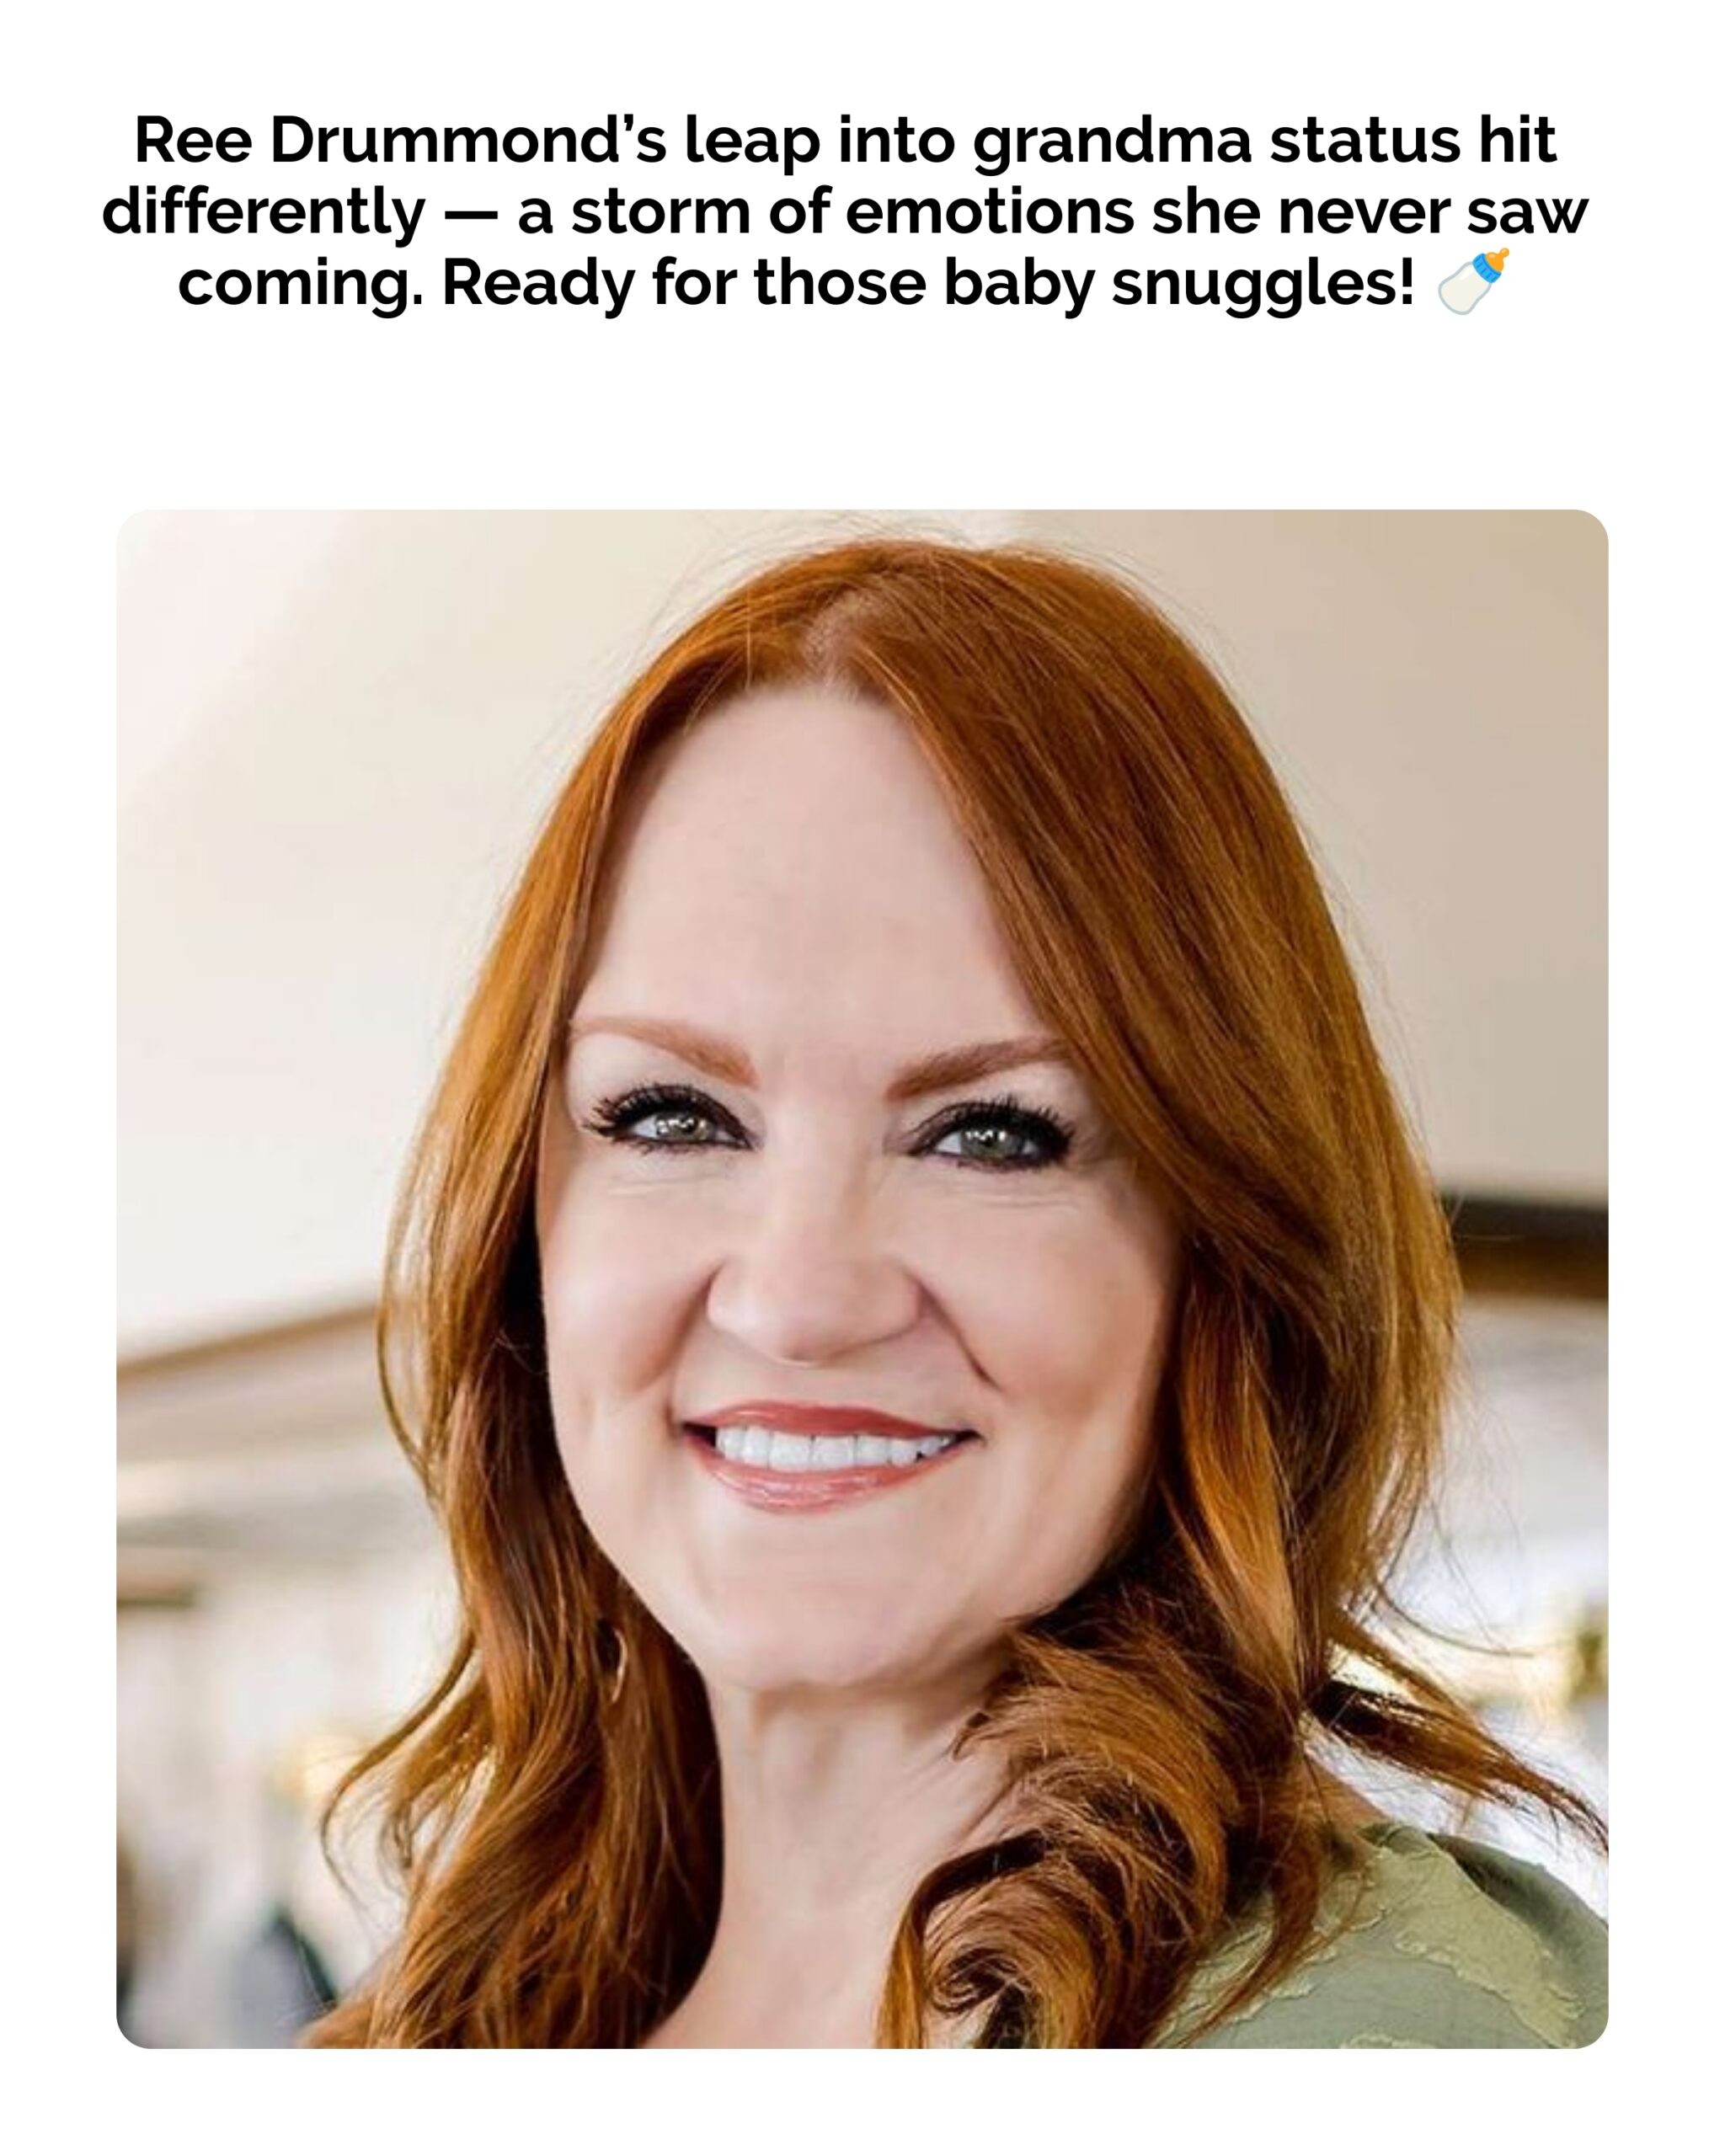 Ree Drummond Says Finding Out She’s Going to Be a Grandma Felt ‘Totally Different Than I Thought It Would’